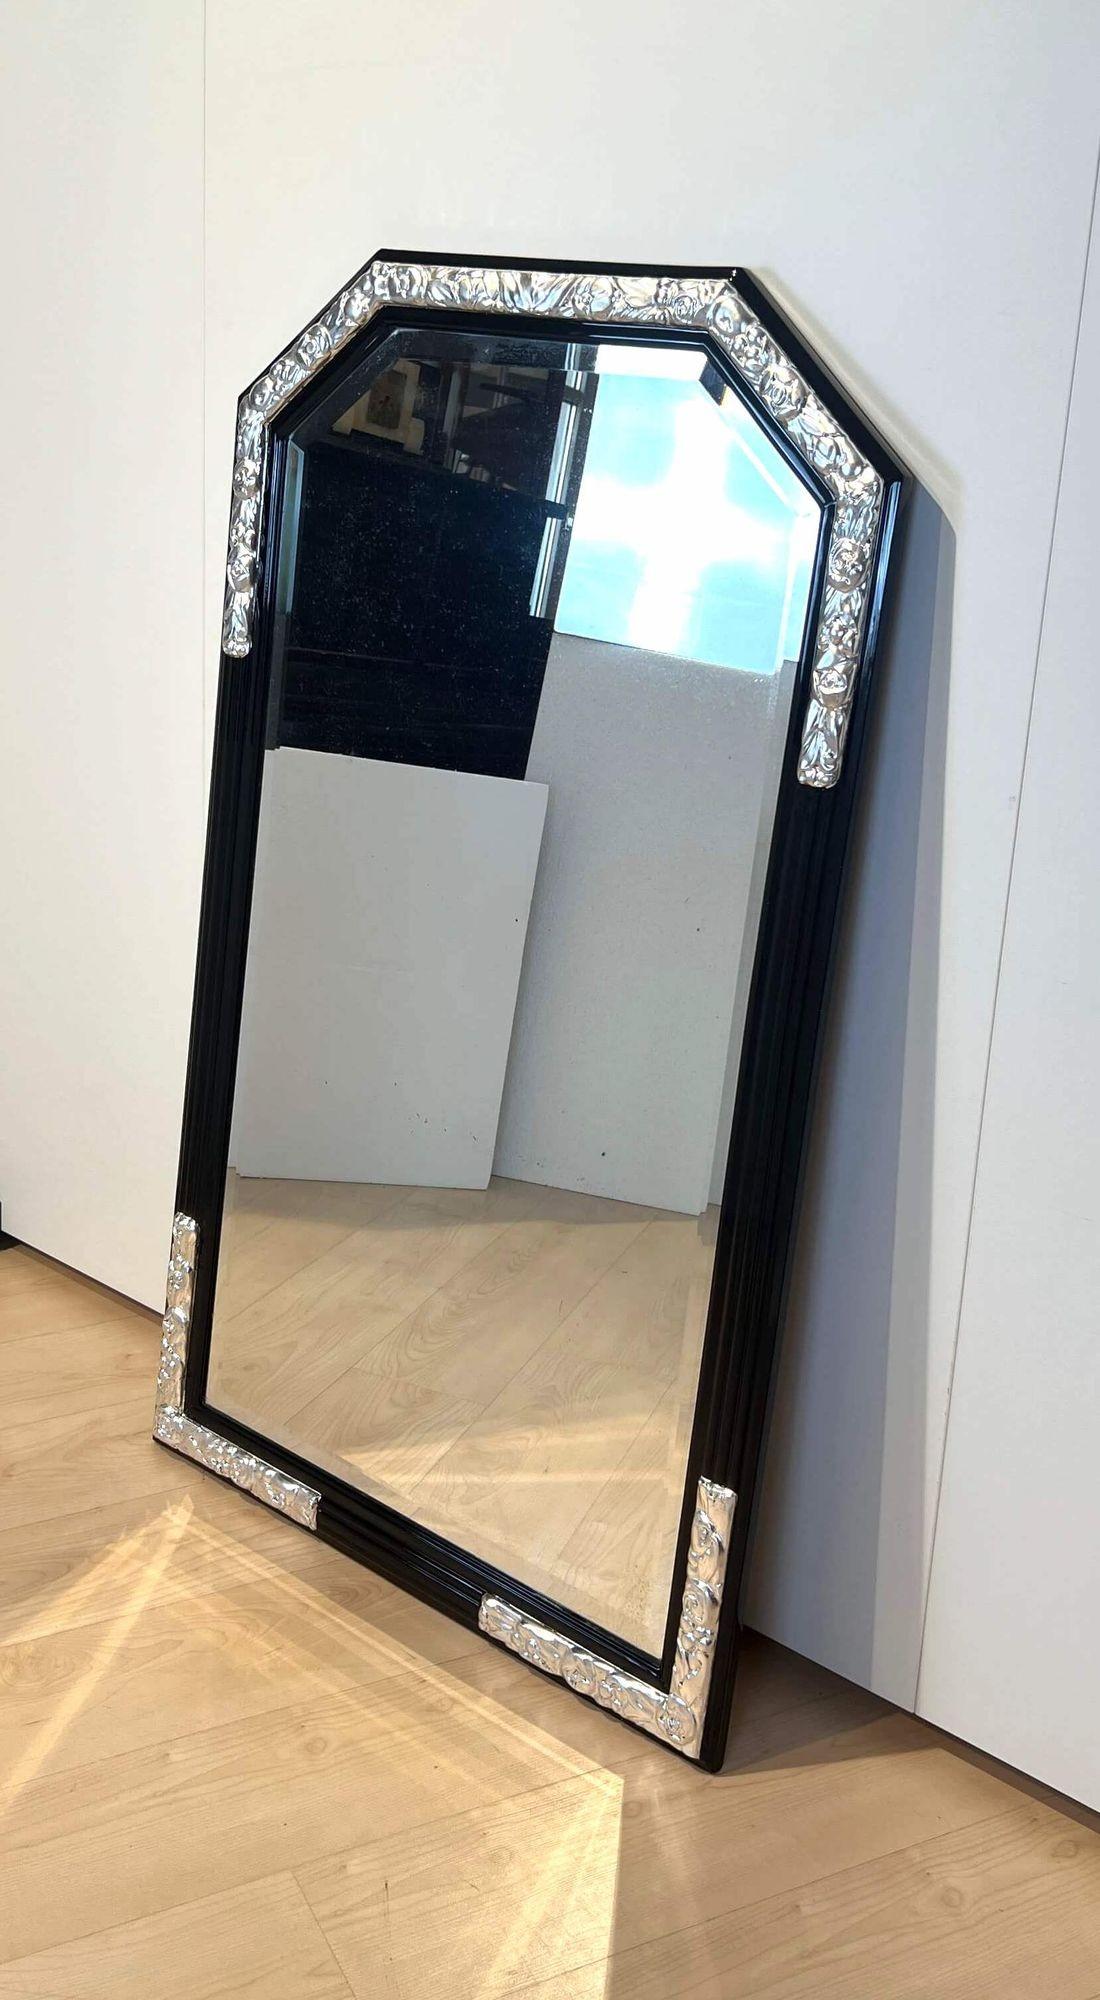 Large Art Deco Wall Mirror, Black Lacquer on Oak, Silver Leaf, France circa 1930.
 
Solid Oak, high gloss black lacquered. Original faceted glass. Floral ornaments covered with silver leaf and protective varnish.
 
Dimensions: H 134 x W 80 cm x D 4